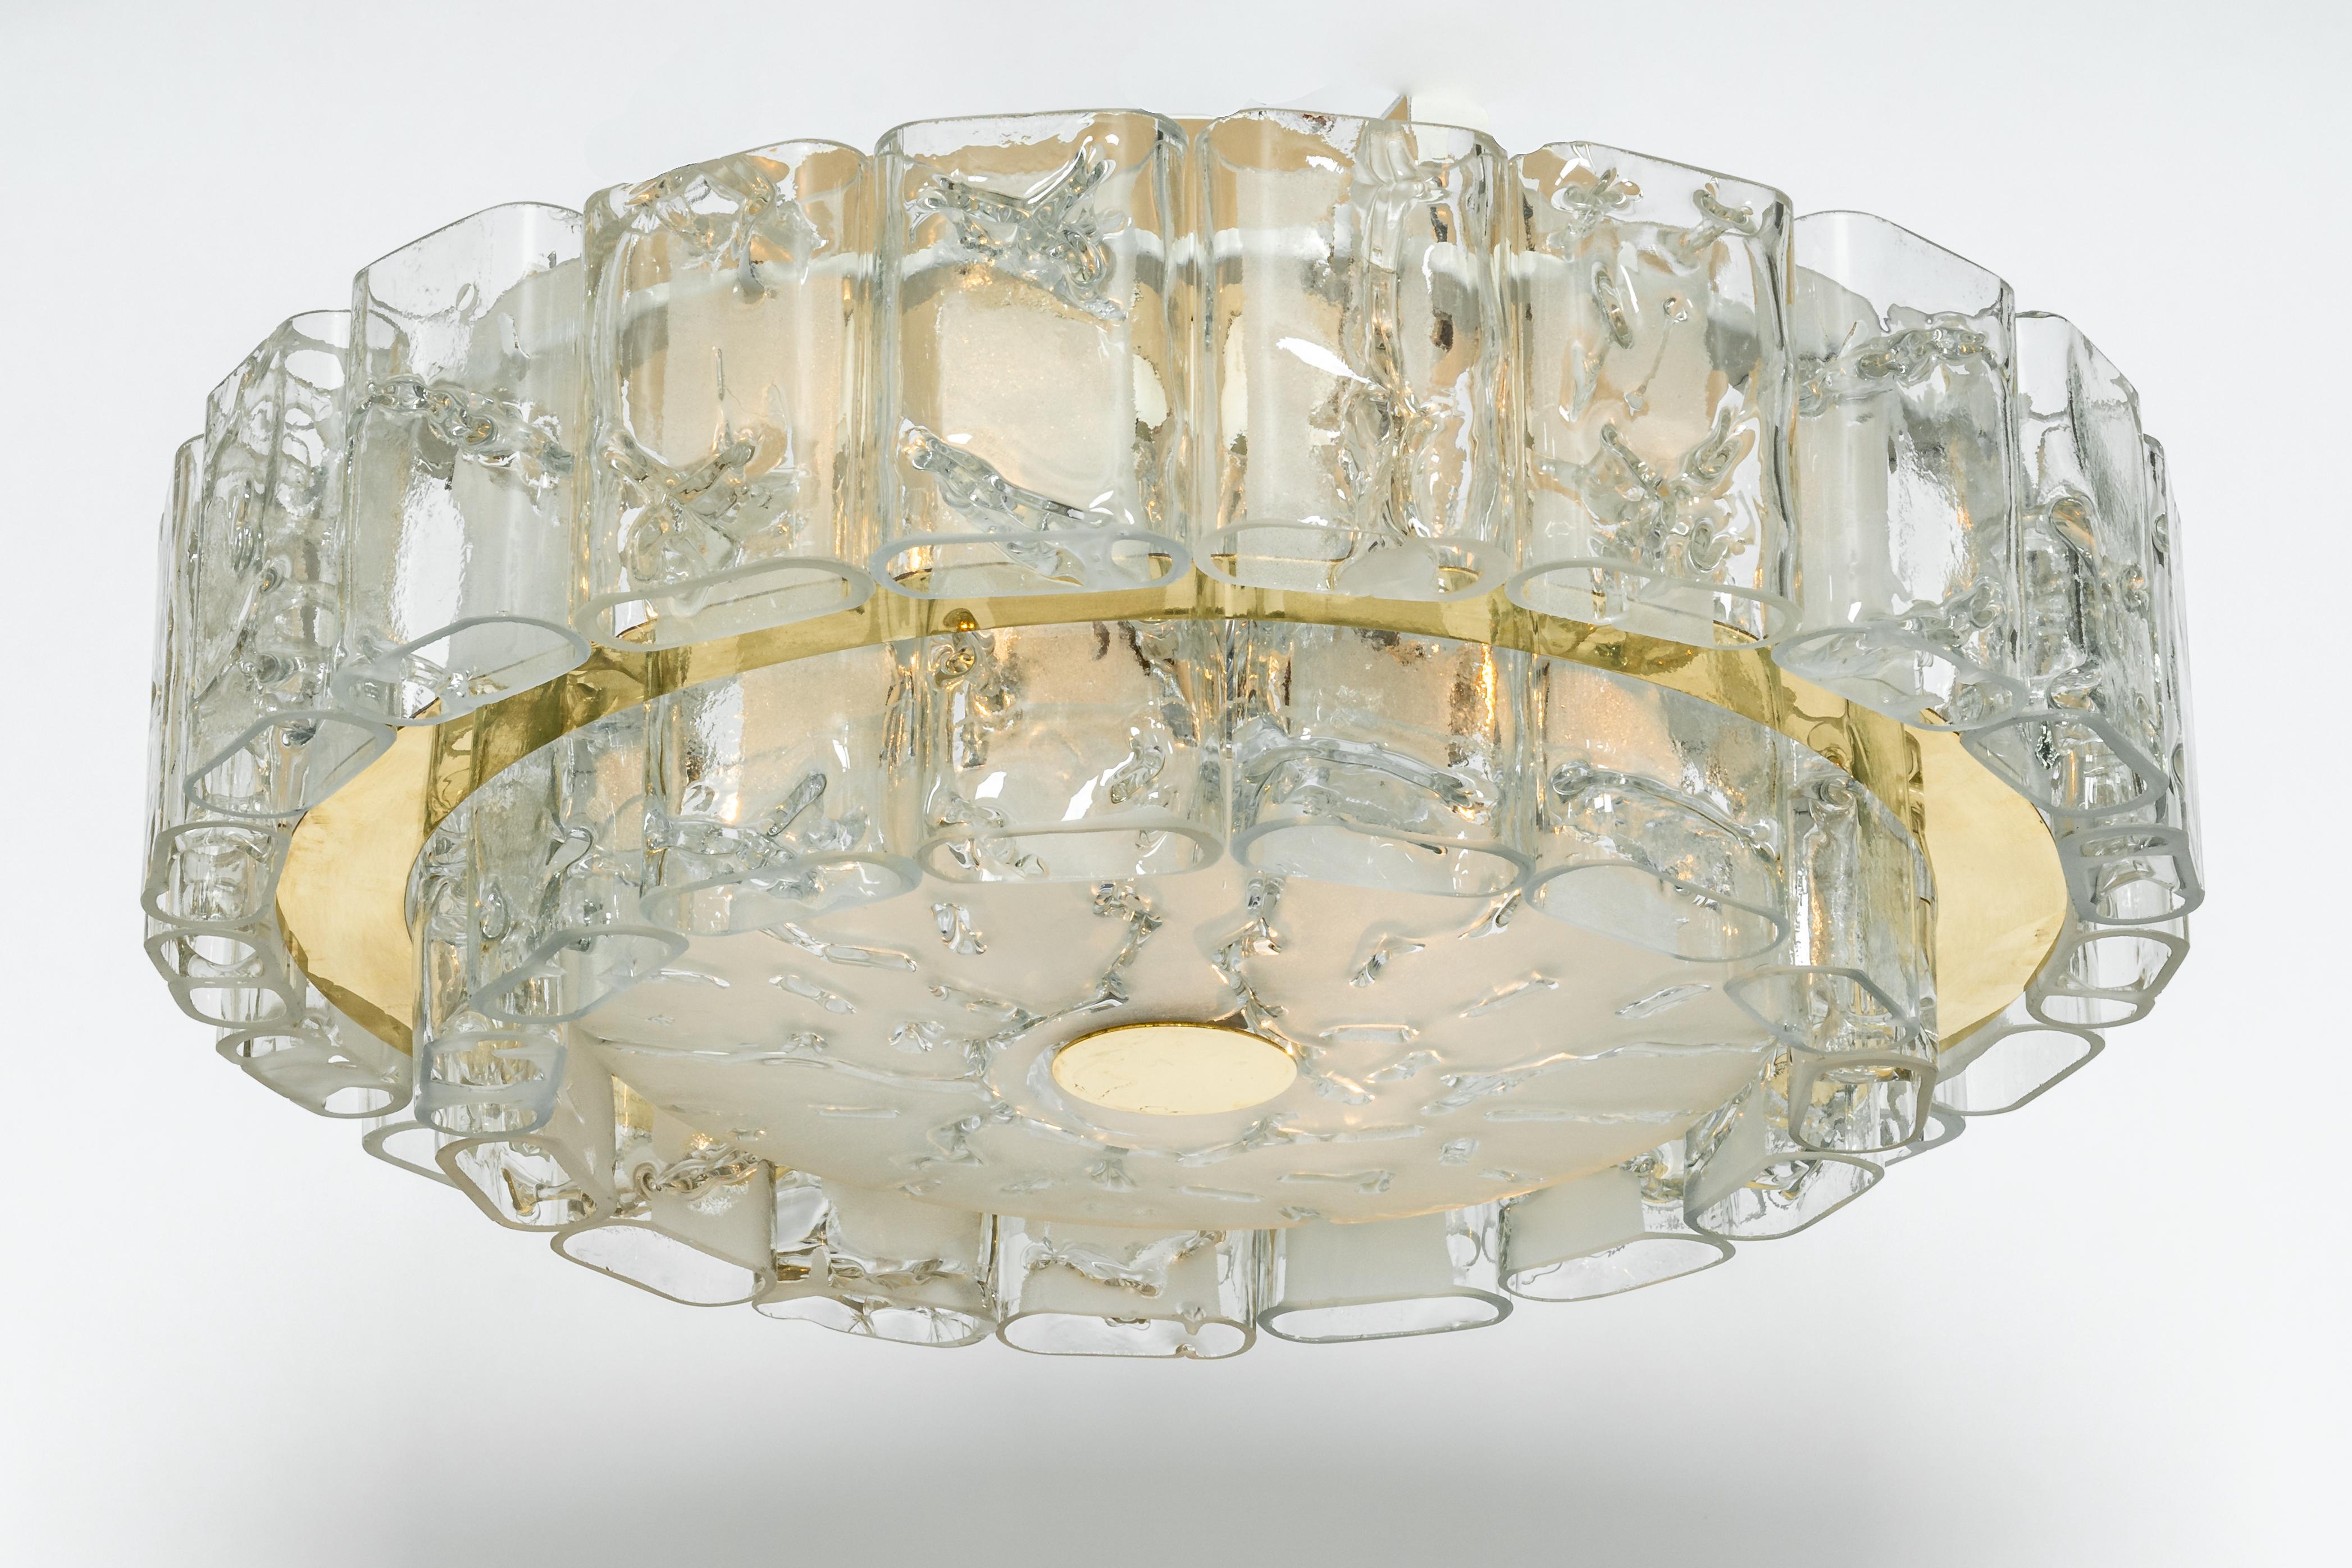 Fantastic two-tier midcentury flush mount by Doria, Germany, manufactured, circa 1960-1969. Two rings of Murano glass cylinders suspended from a fixture.
Heavy quality and in very good condition. Cleaned, well-wired and ready to use.
The fixture